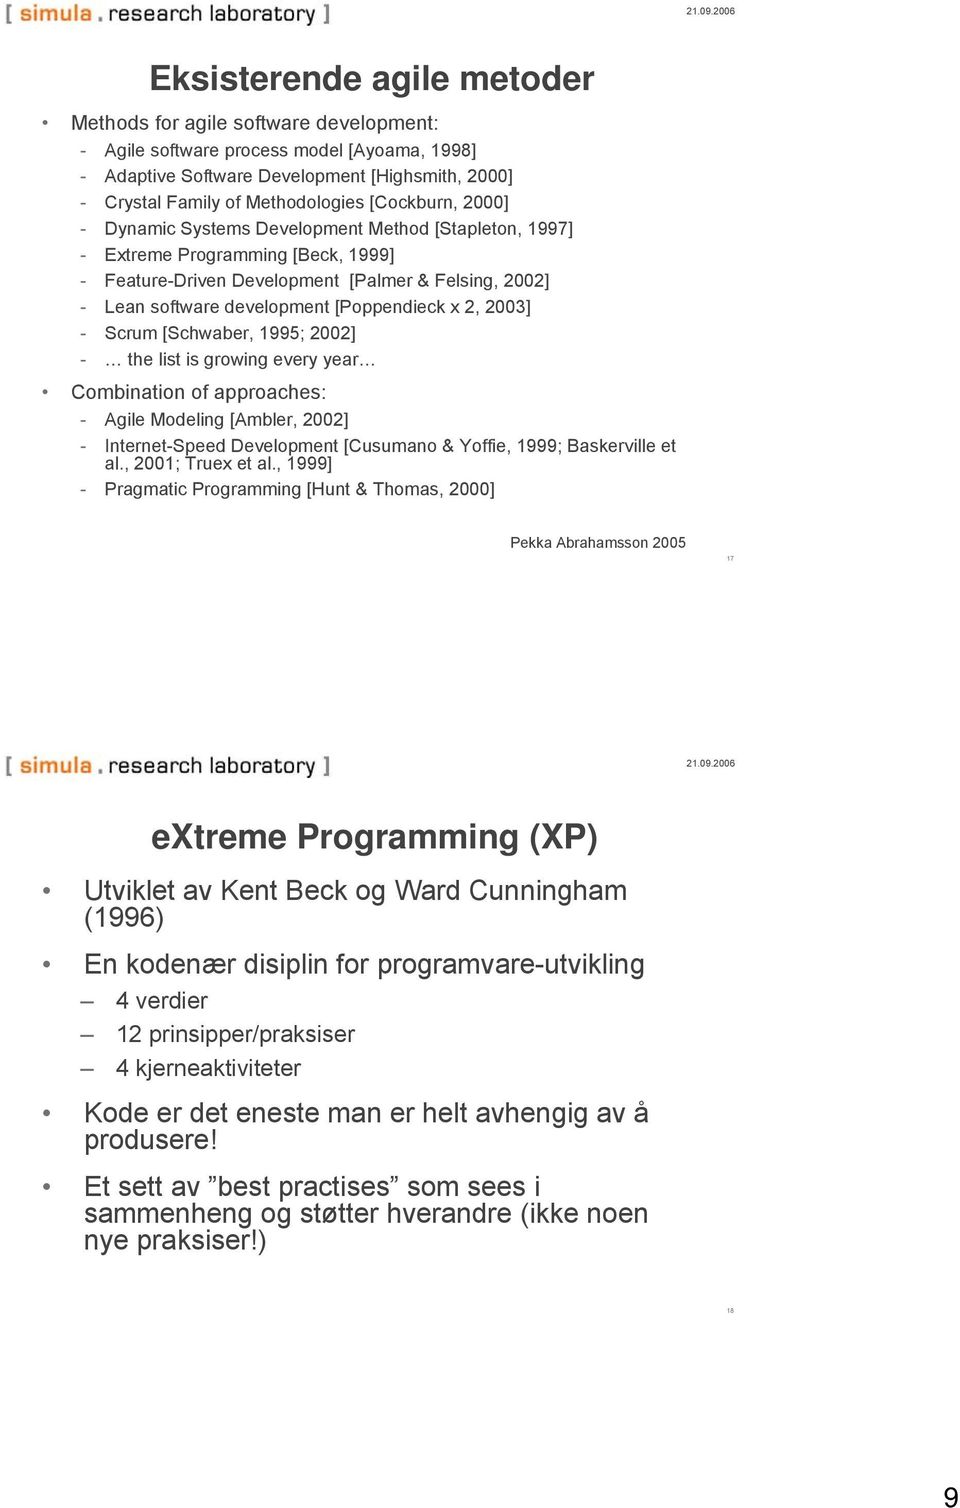 [Poppendieck x 2, 2003] - Scrum [Schwaber, 1995; 2002] - the list is growing every year Combination of approaches: - Agile Modeling [Ambler, 2002] - Internet-Speed Development [Cusumano & Yoffie,